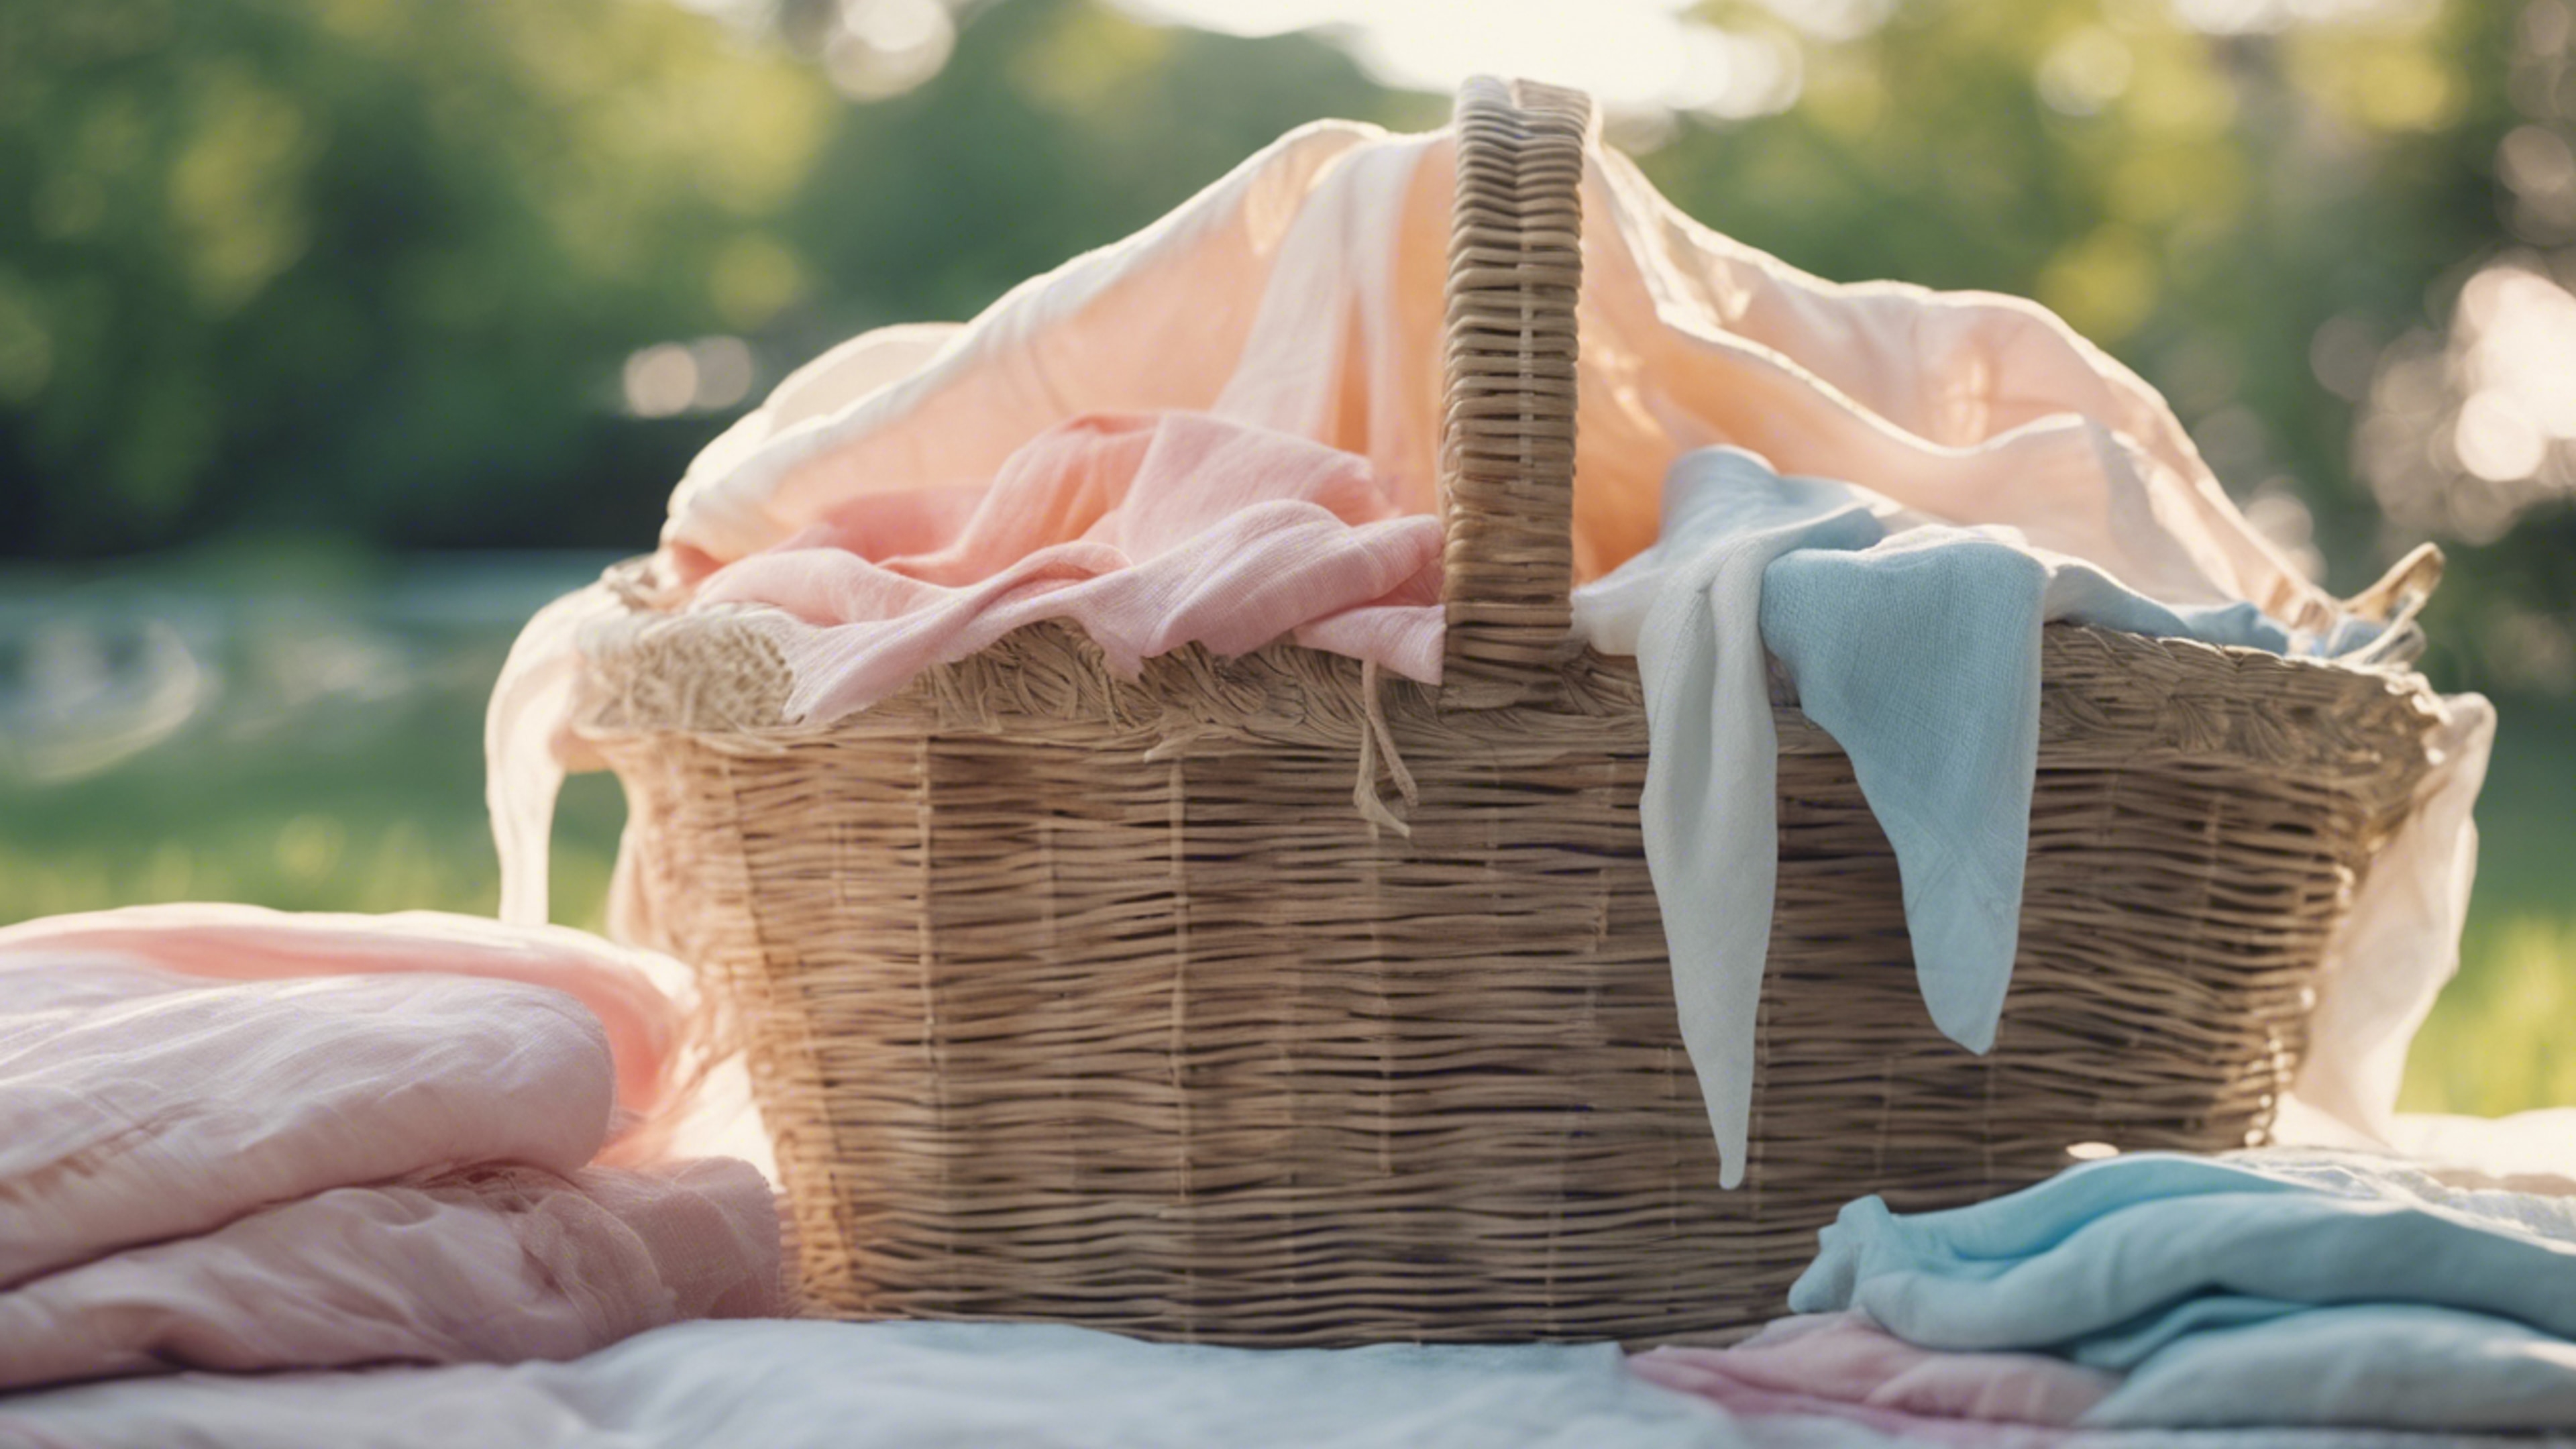 Baskets filled with freshly laundered, pastel-colored linens in the summer breeze. Wallpaper[fbe86aeed5ef45d2847e]